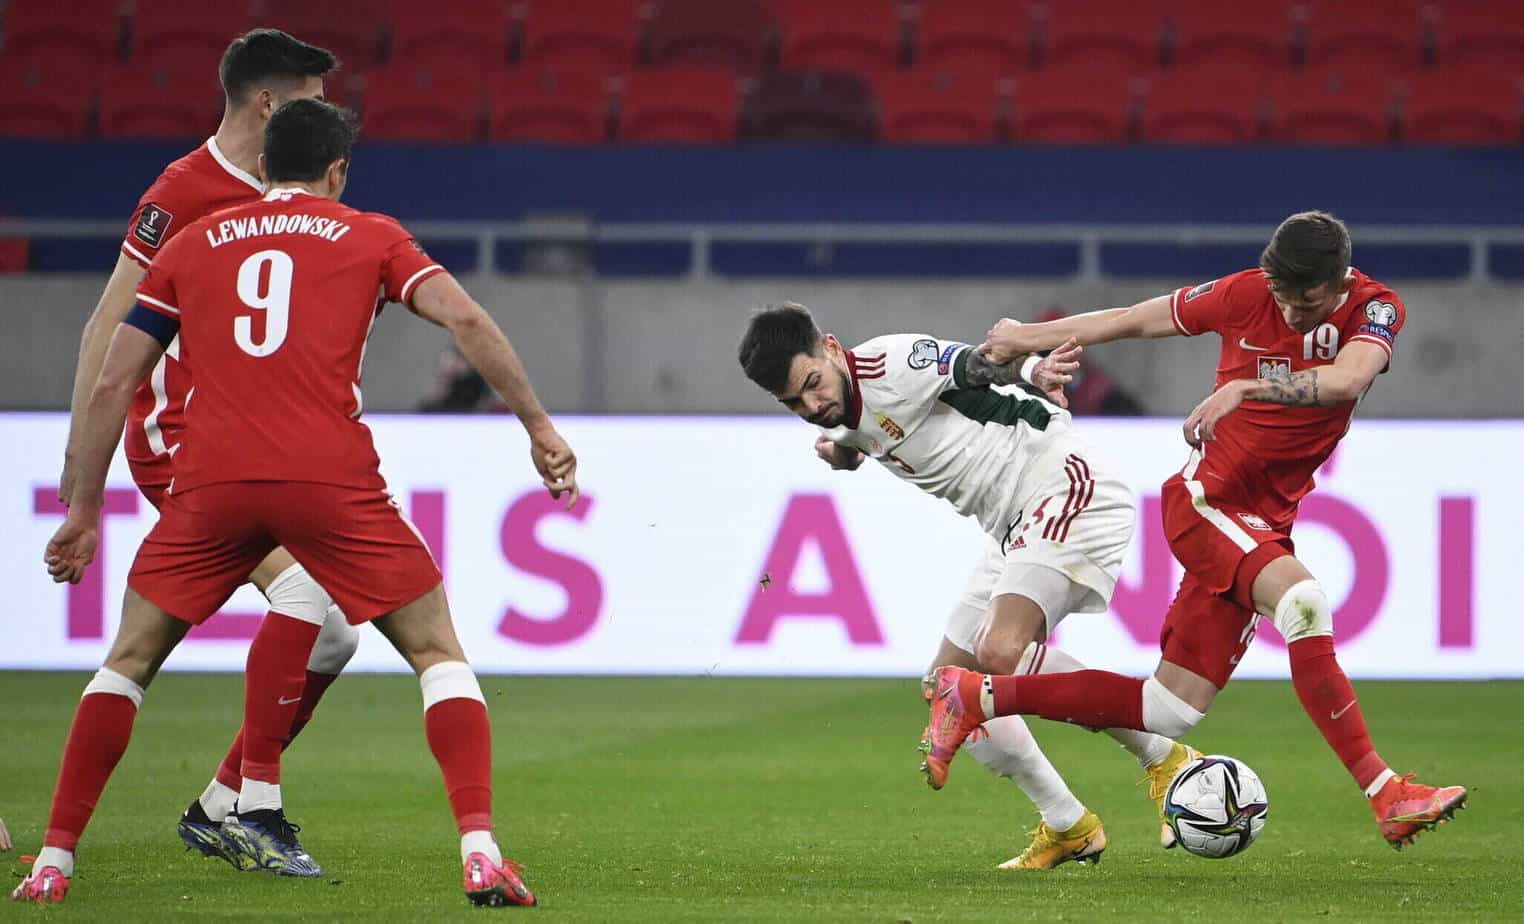 Poland vs. Hungary – Betting odds and Preview